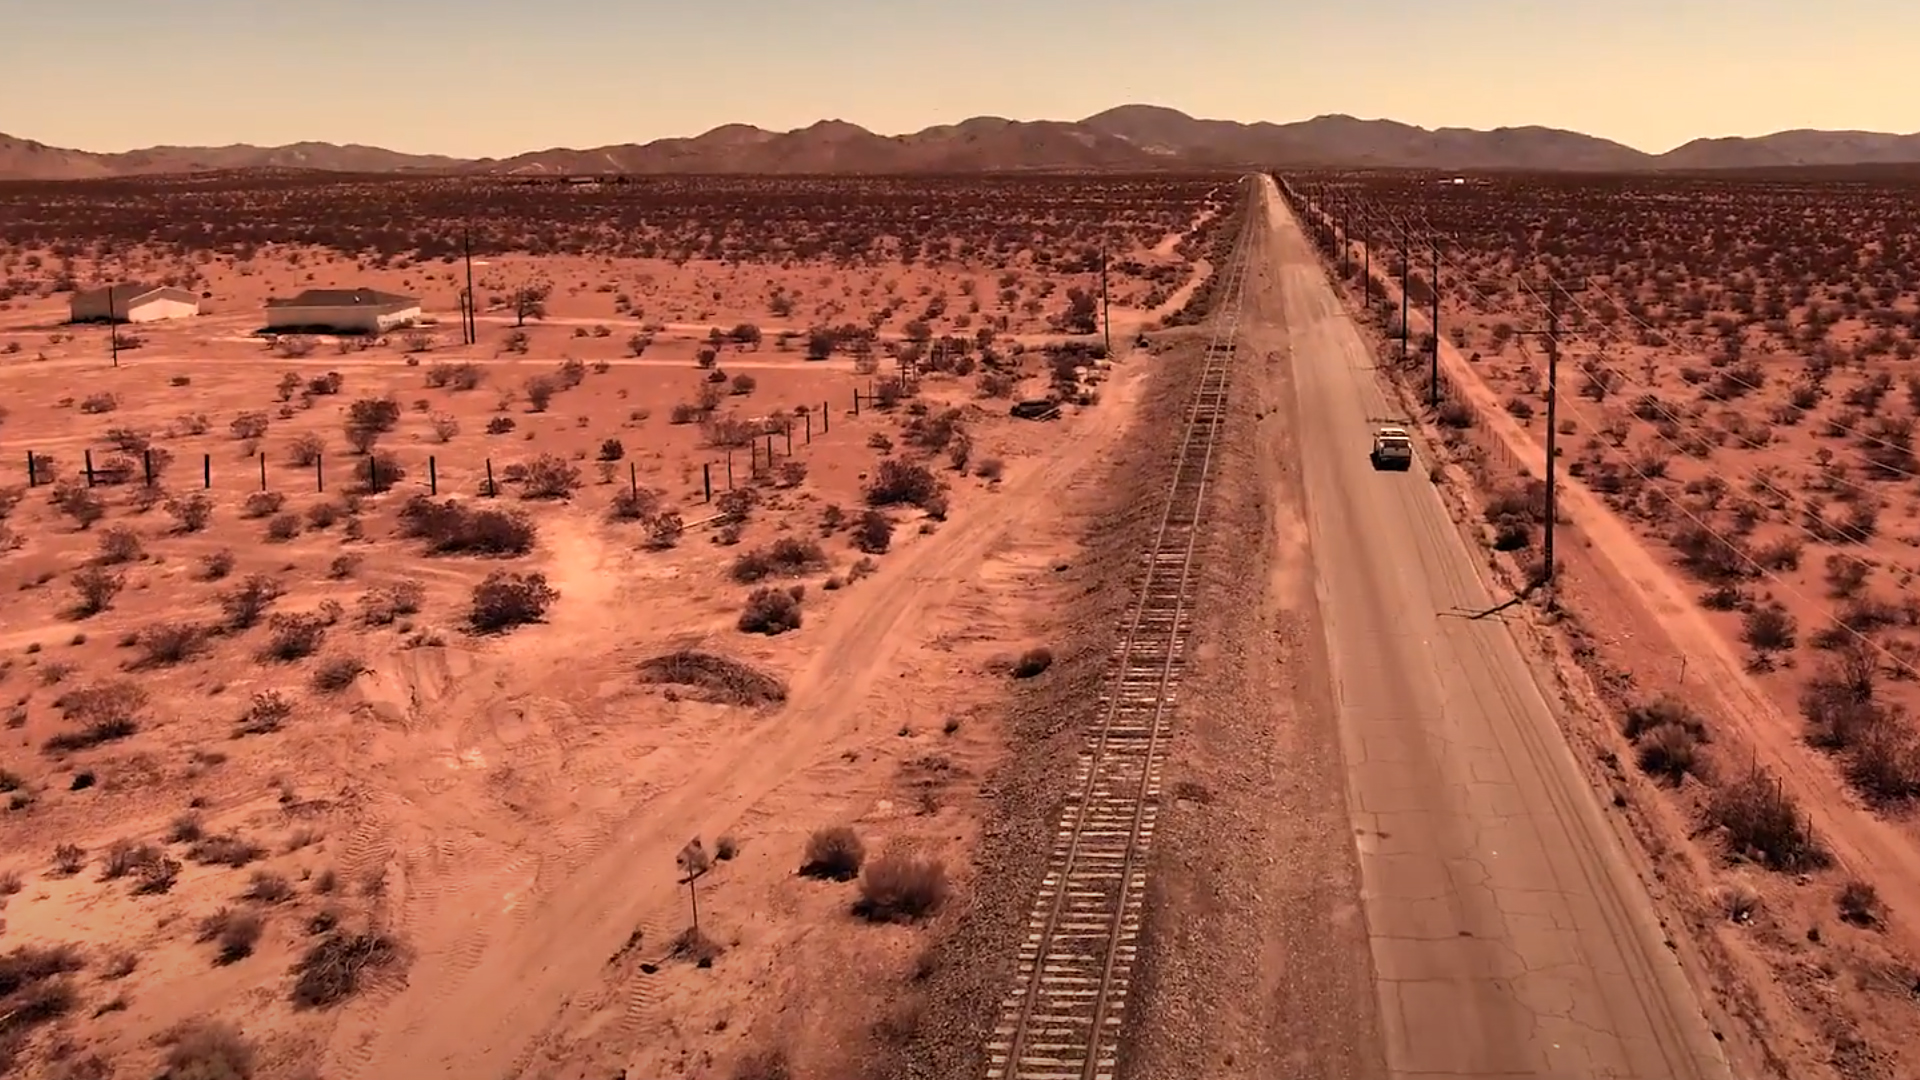 Desert drone shot of road and railroad tracks